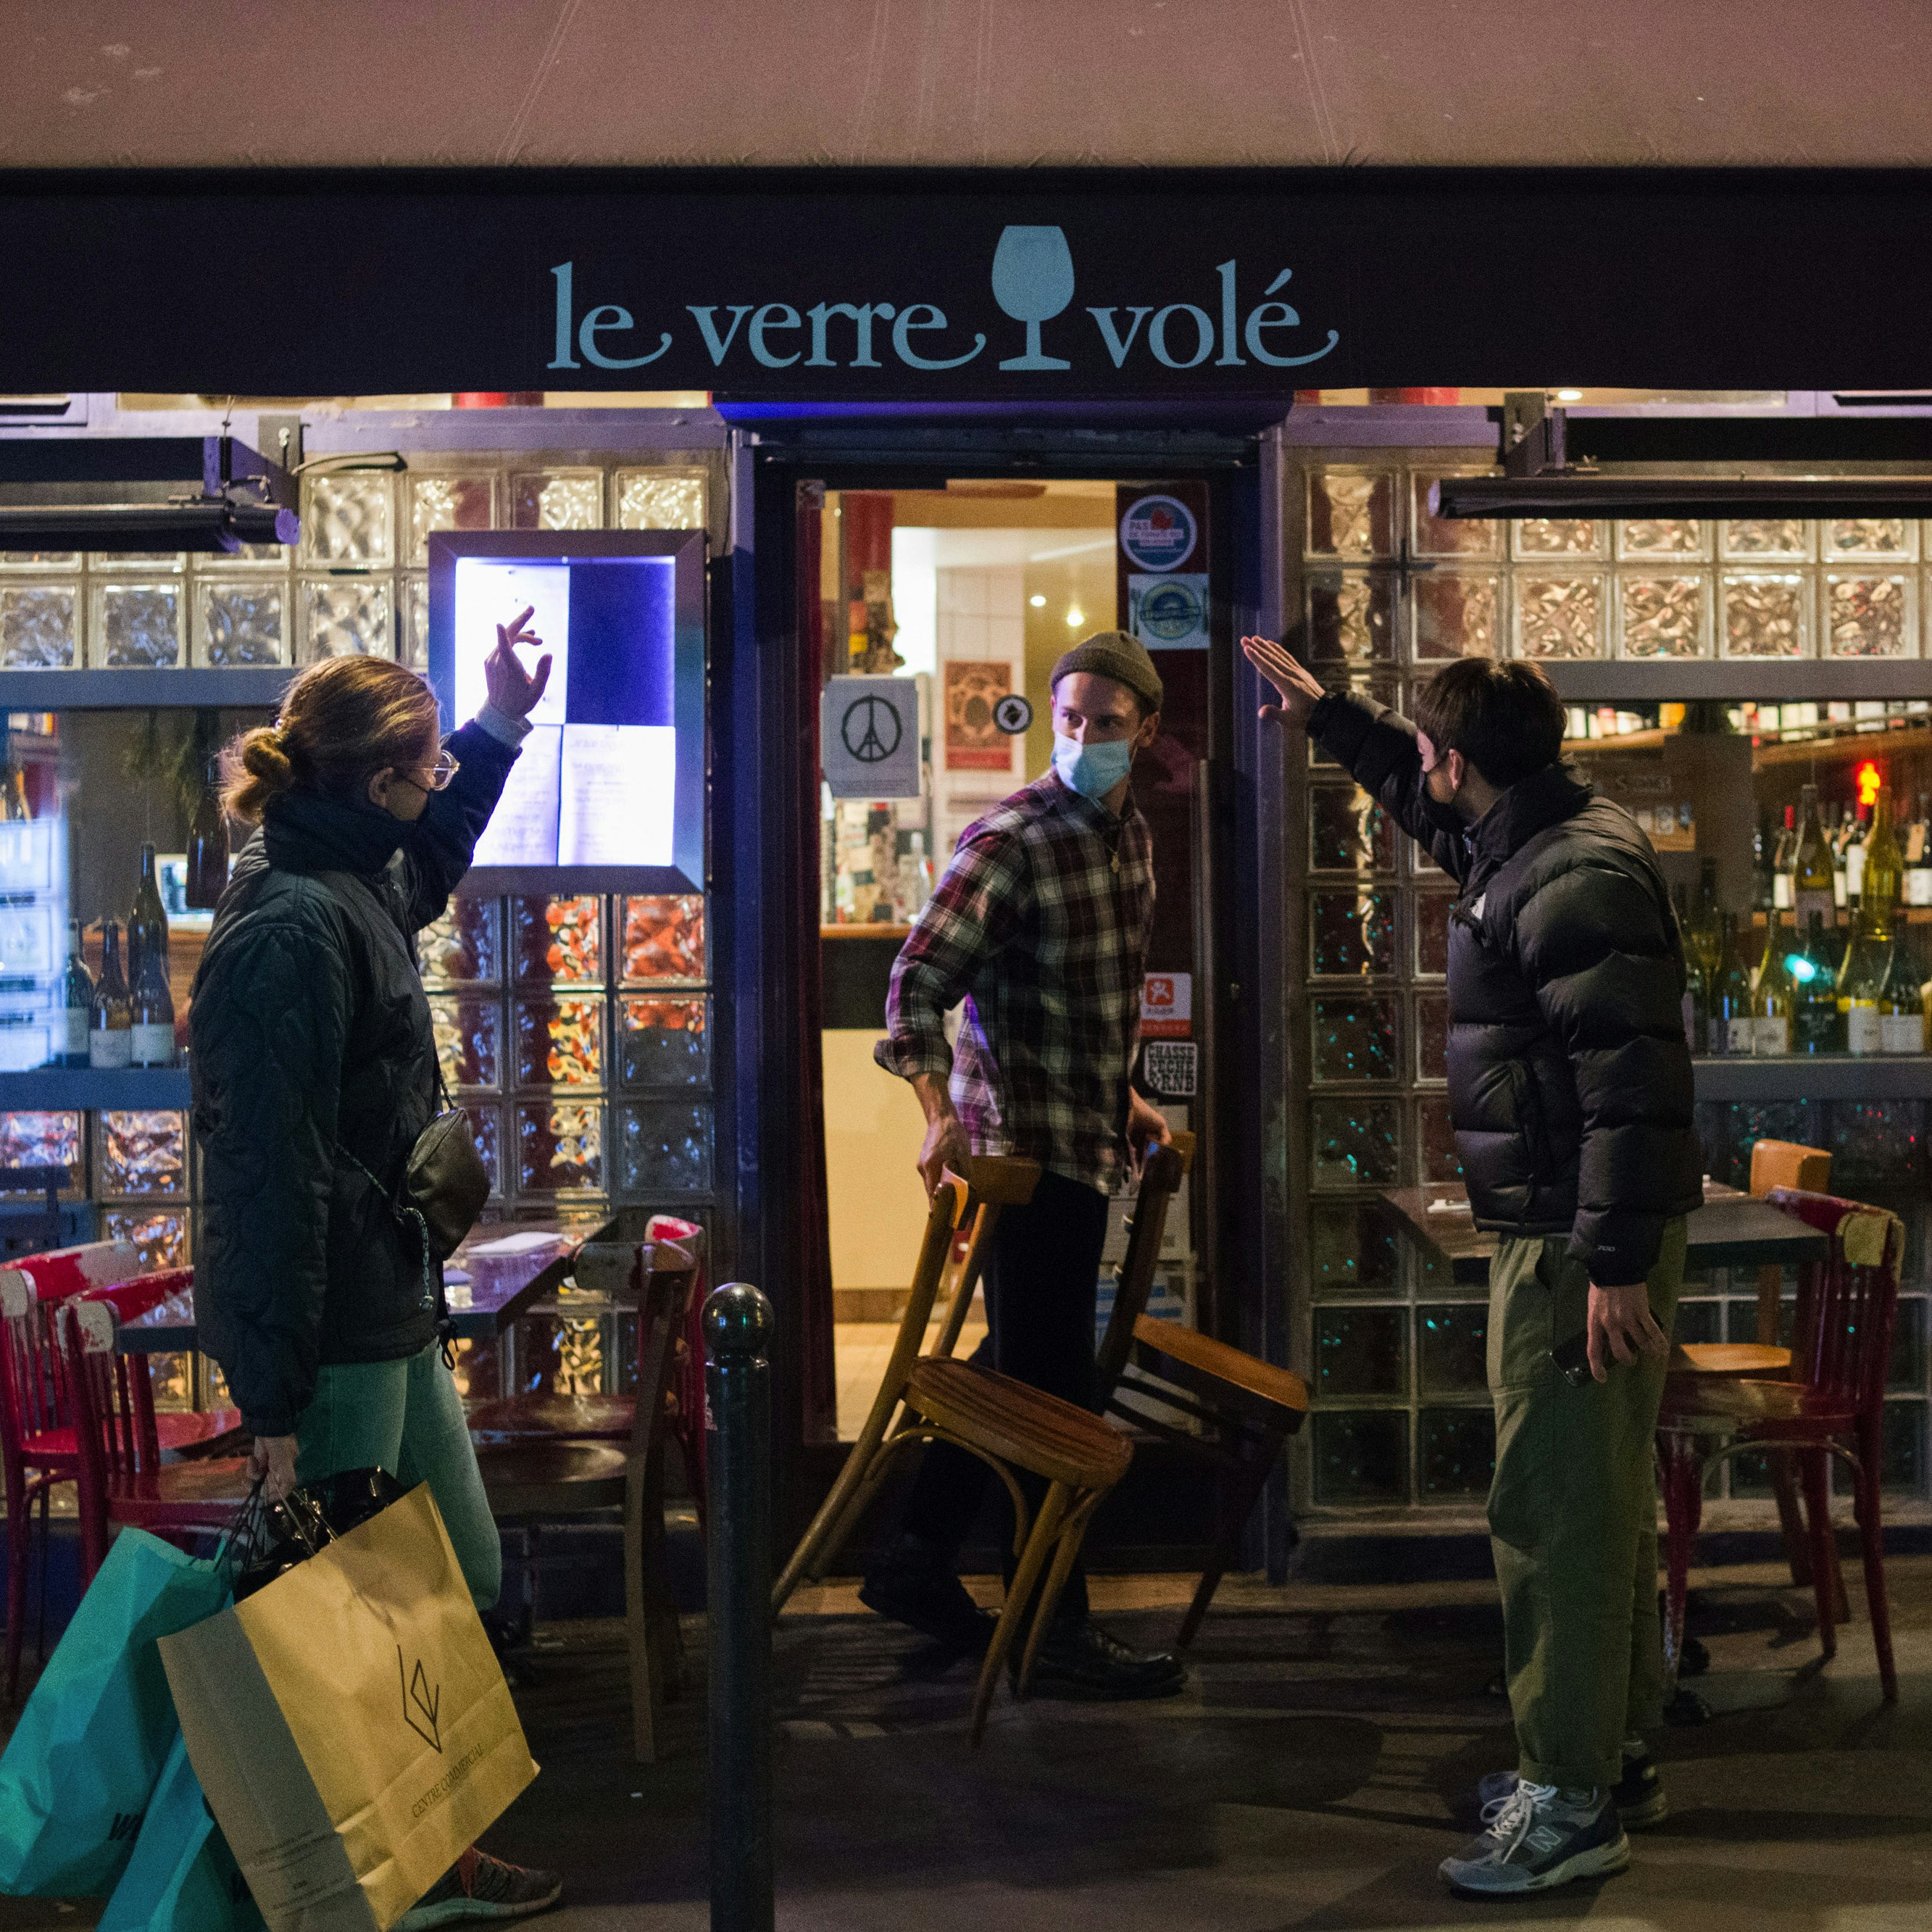 Customers wave goodbye to a waiter while leaving a bar ahead of a curfew in Paris, France, on Saturday, Oct. 17, 2020. President Emmanuel Macron will confine residents of nine of the country's biggest cities to their homes between 9 p.m. and 6 a.m. for four weeks starting on Saturday. Photographer: Nathan Laine/Bloomberg via Getty Images